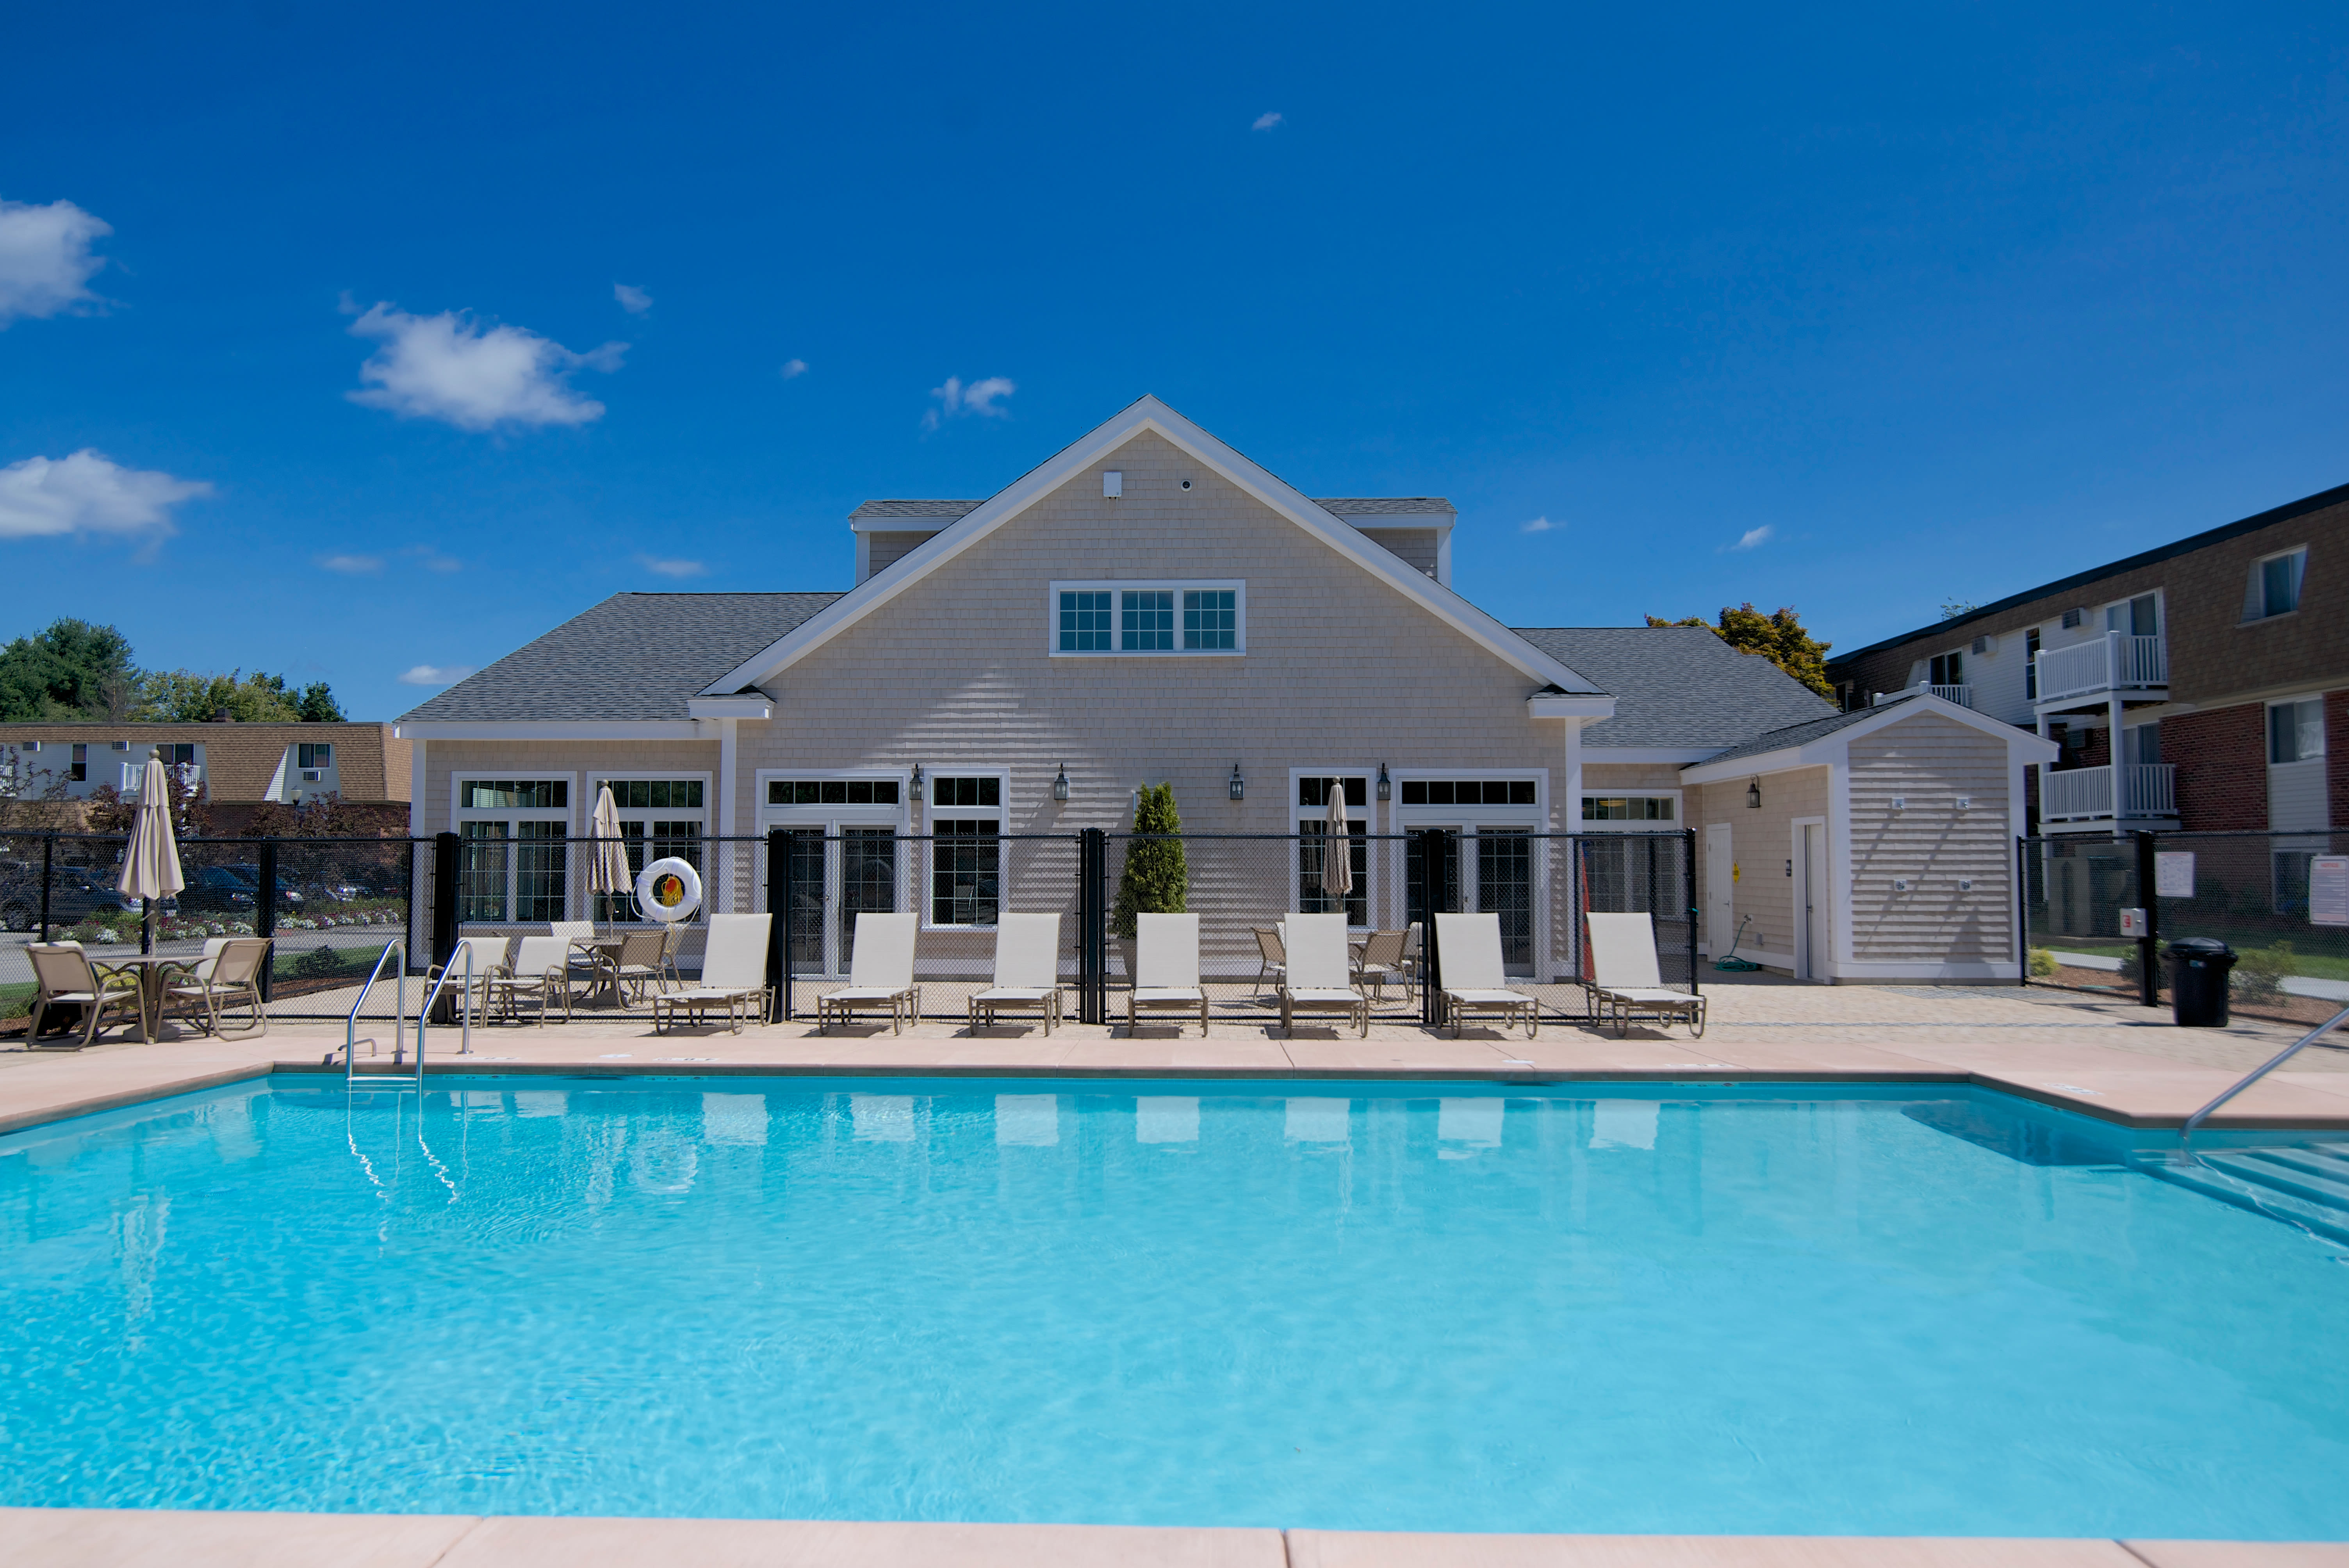 Community pool at Park Village West in Westborough, Massachusetts